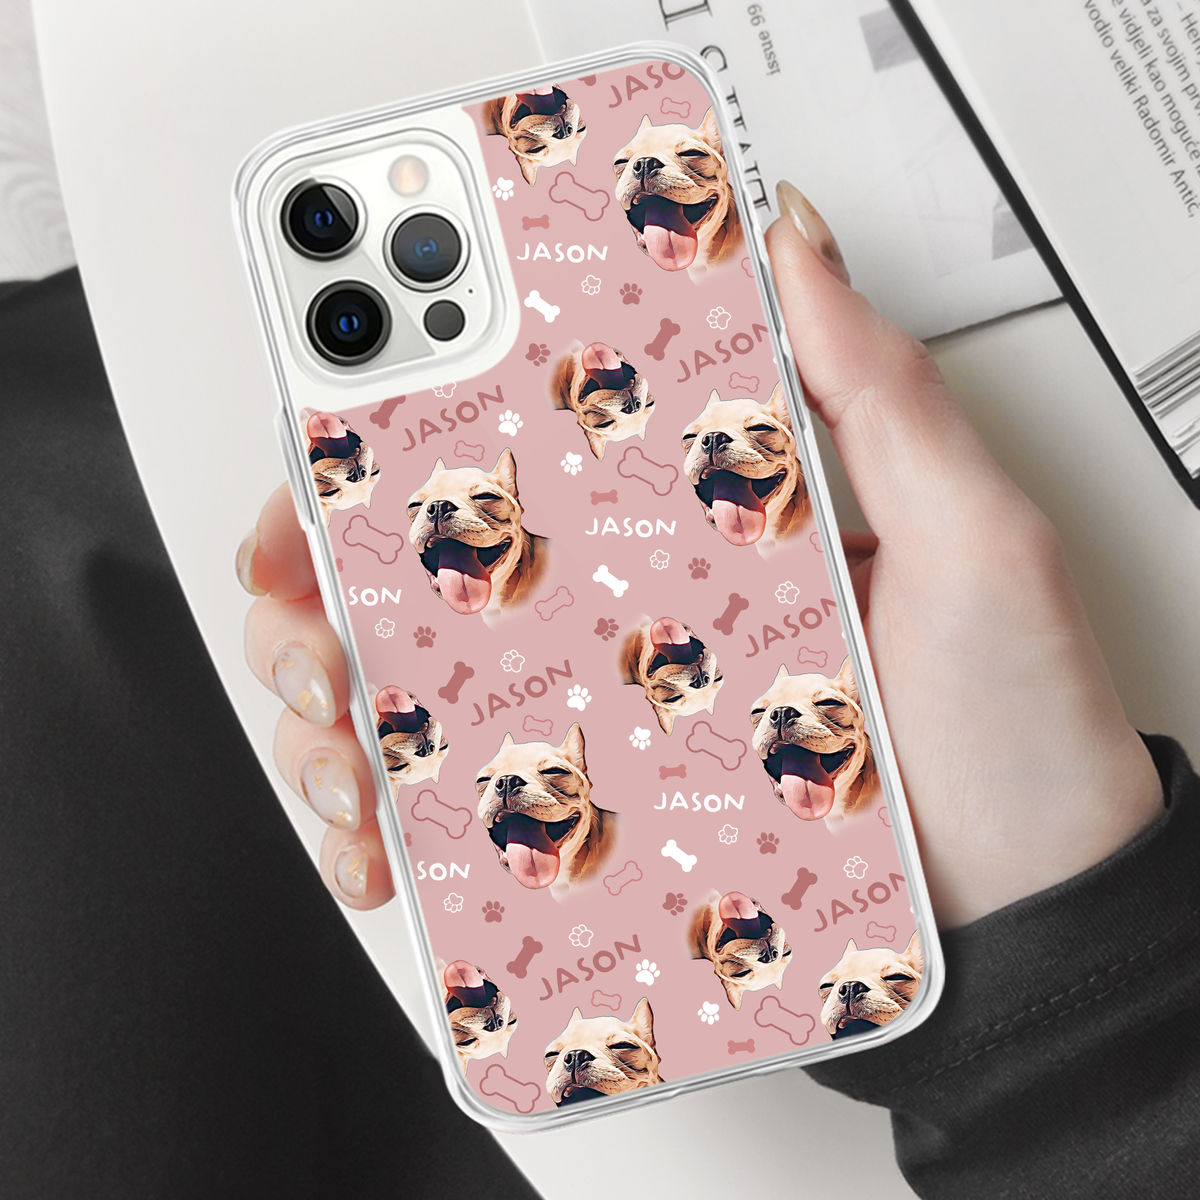 Custom Phone Case From Photo - iPhone Case - Pet Lover Gifts - Dog Portrait Pattern - Digital Oil Painting_1